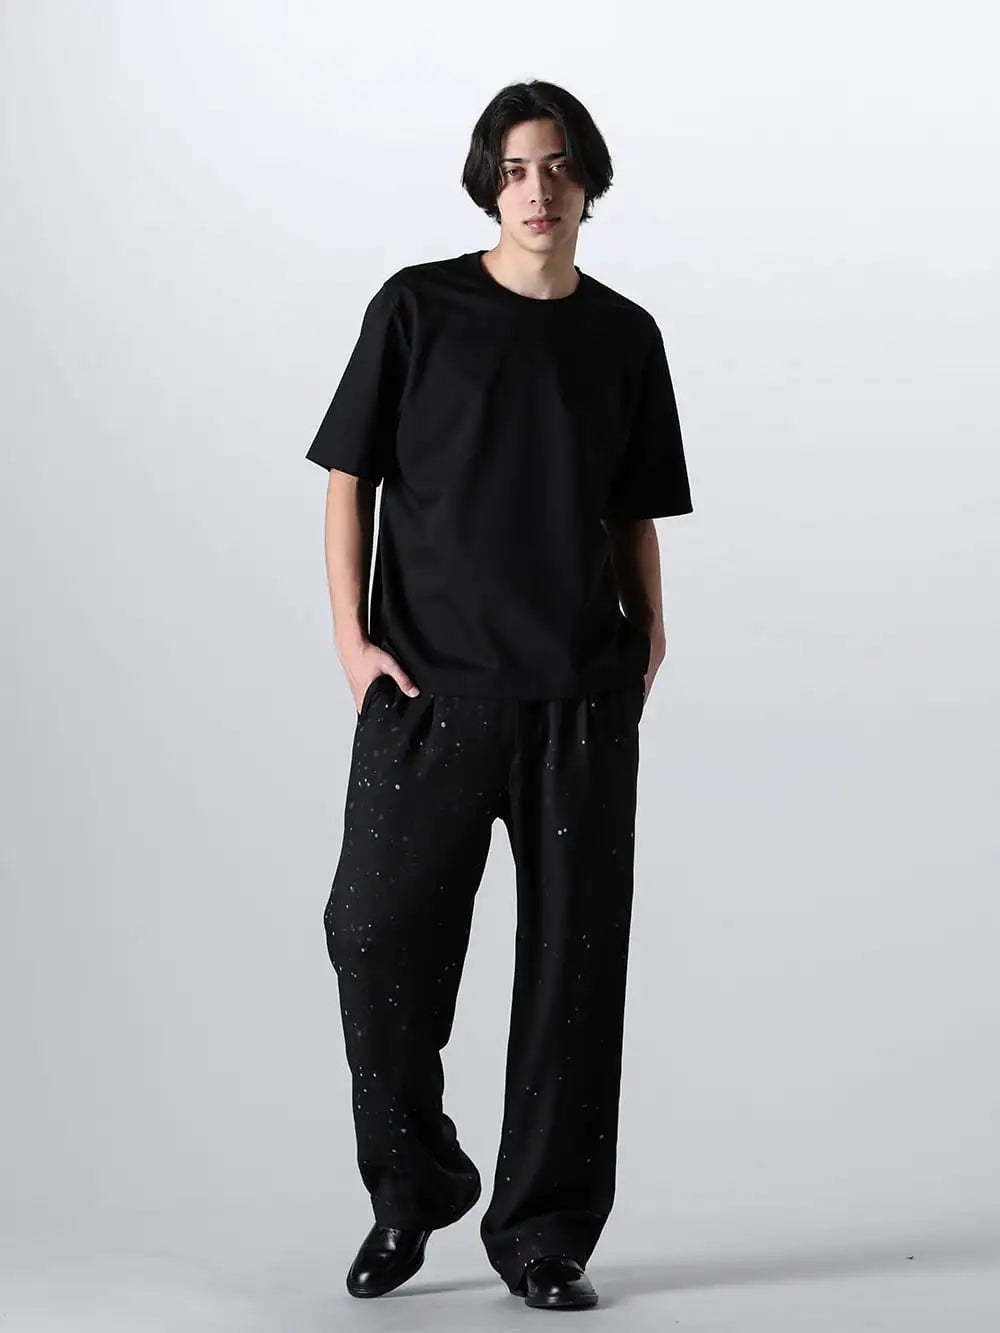 IRENISA 24SS - Coordinates with short sleeve T-shirt Black - IH-24SS-T006-AG-Black-Black-cord - short sleeve T-shirt Black × Black cord - IH-24SS-P033-DMF-Black - ワンタックトラウザーズ Black - IH-22SS-S001-RC - leather shoes 3-001